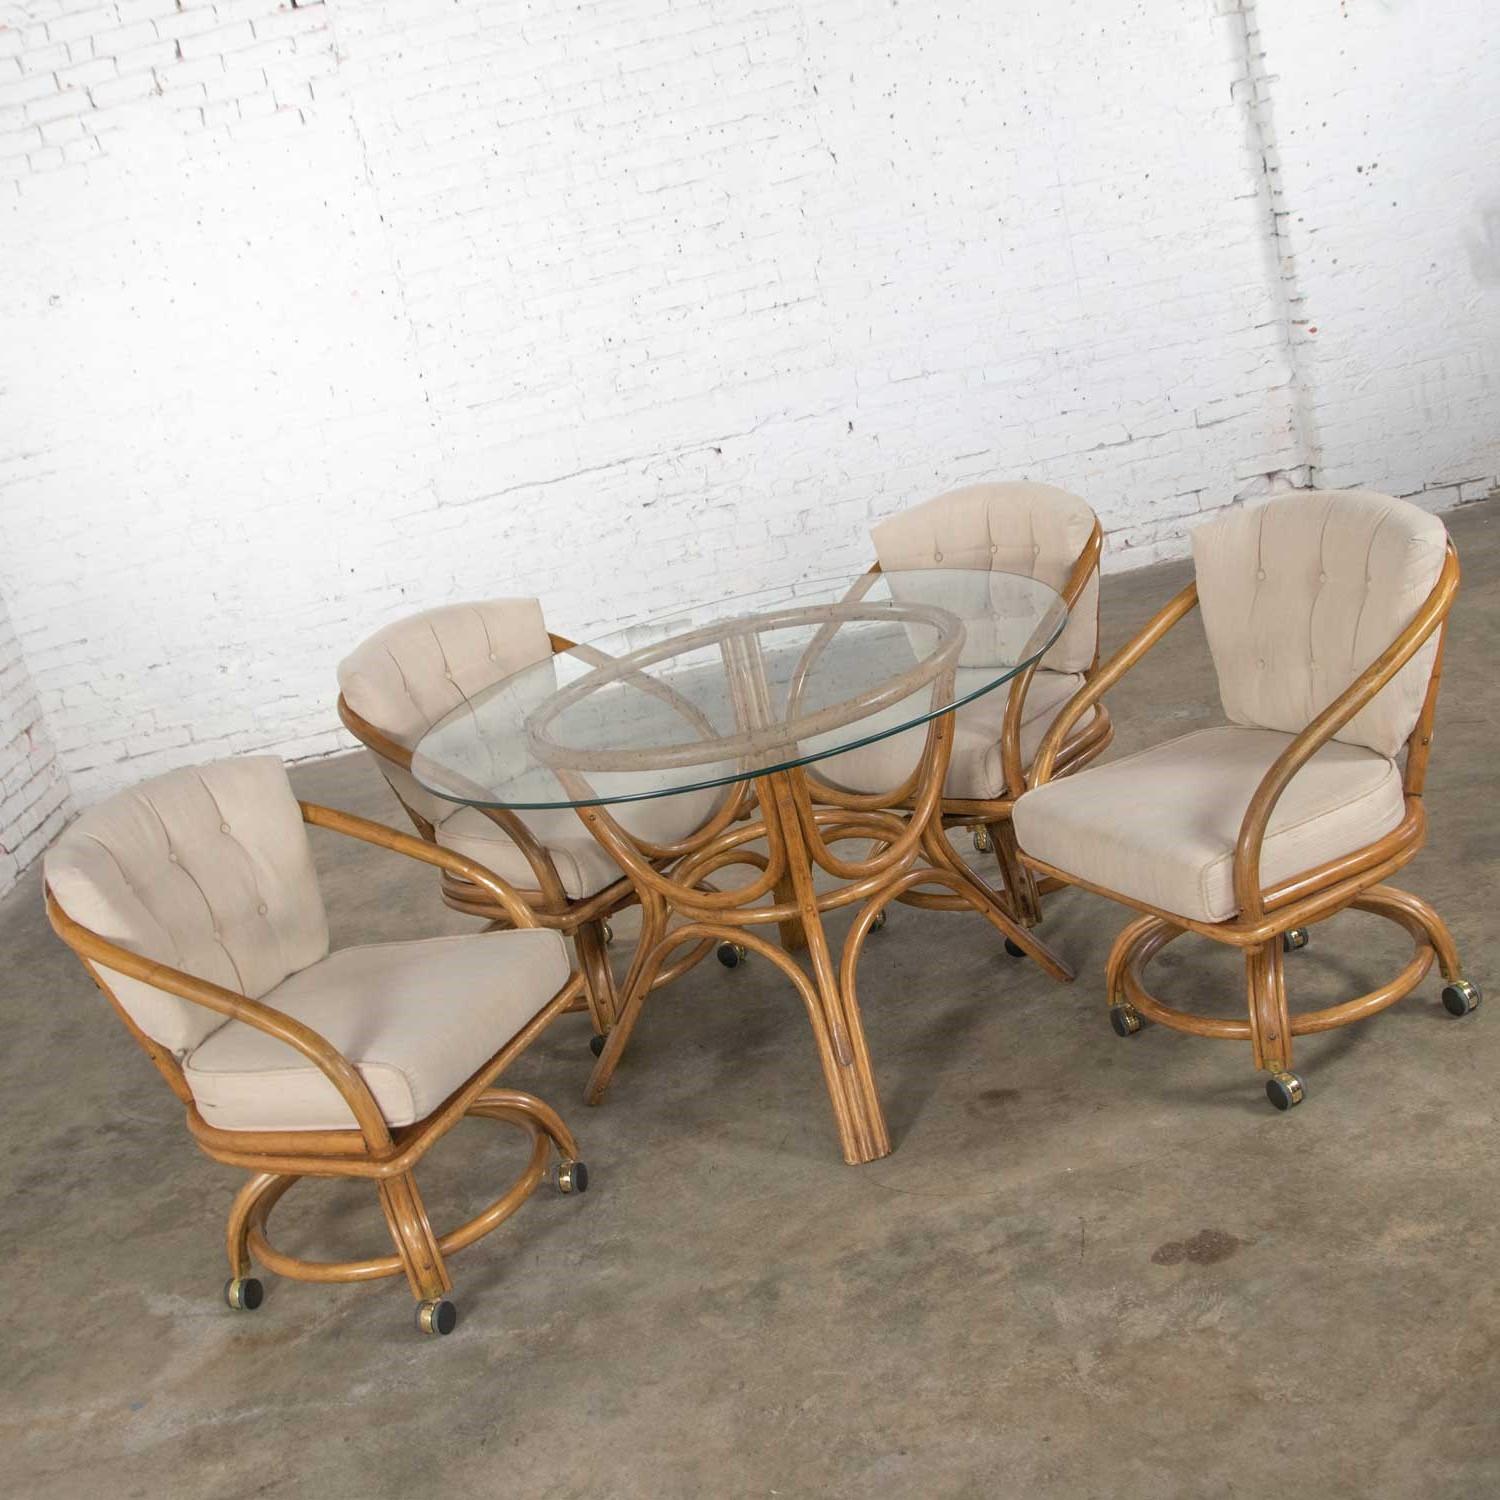 round wicker table with glass top and 4 chairs